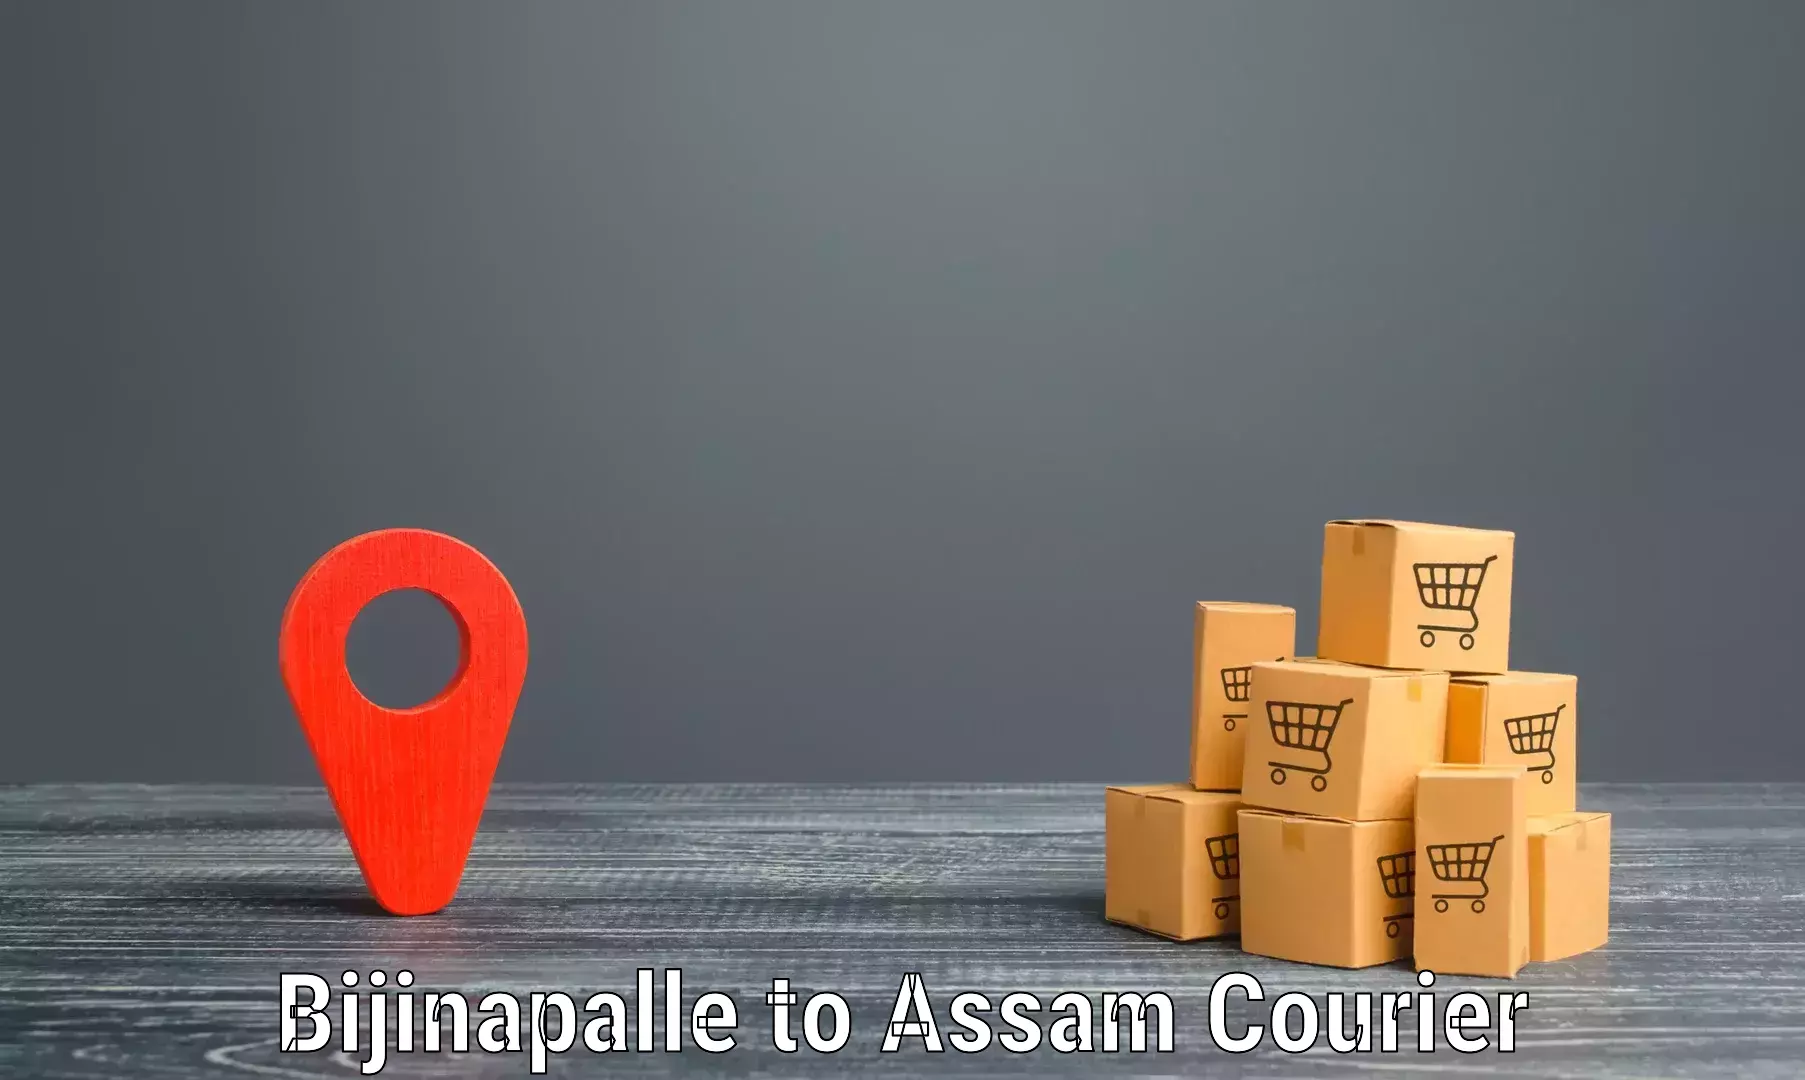 Global courier networks Bijinapalle to Hojai